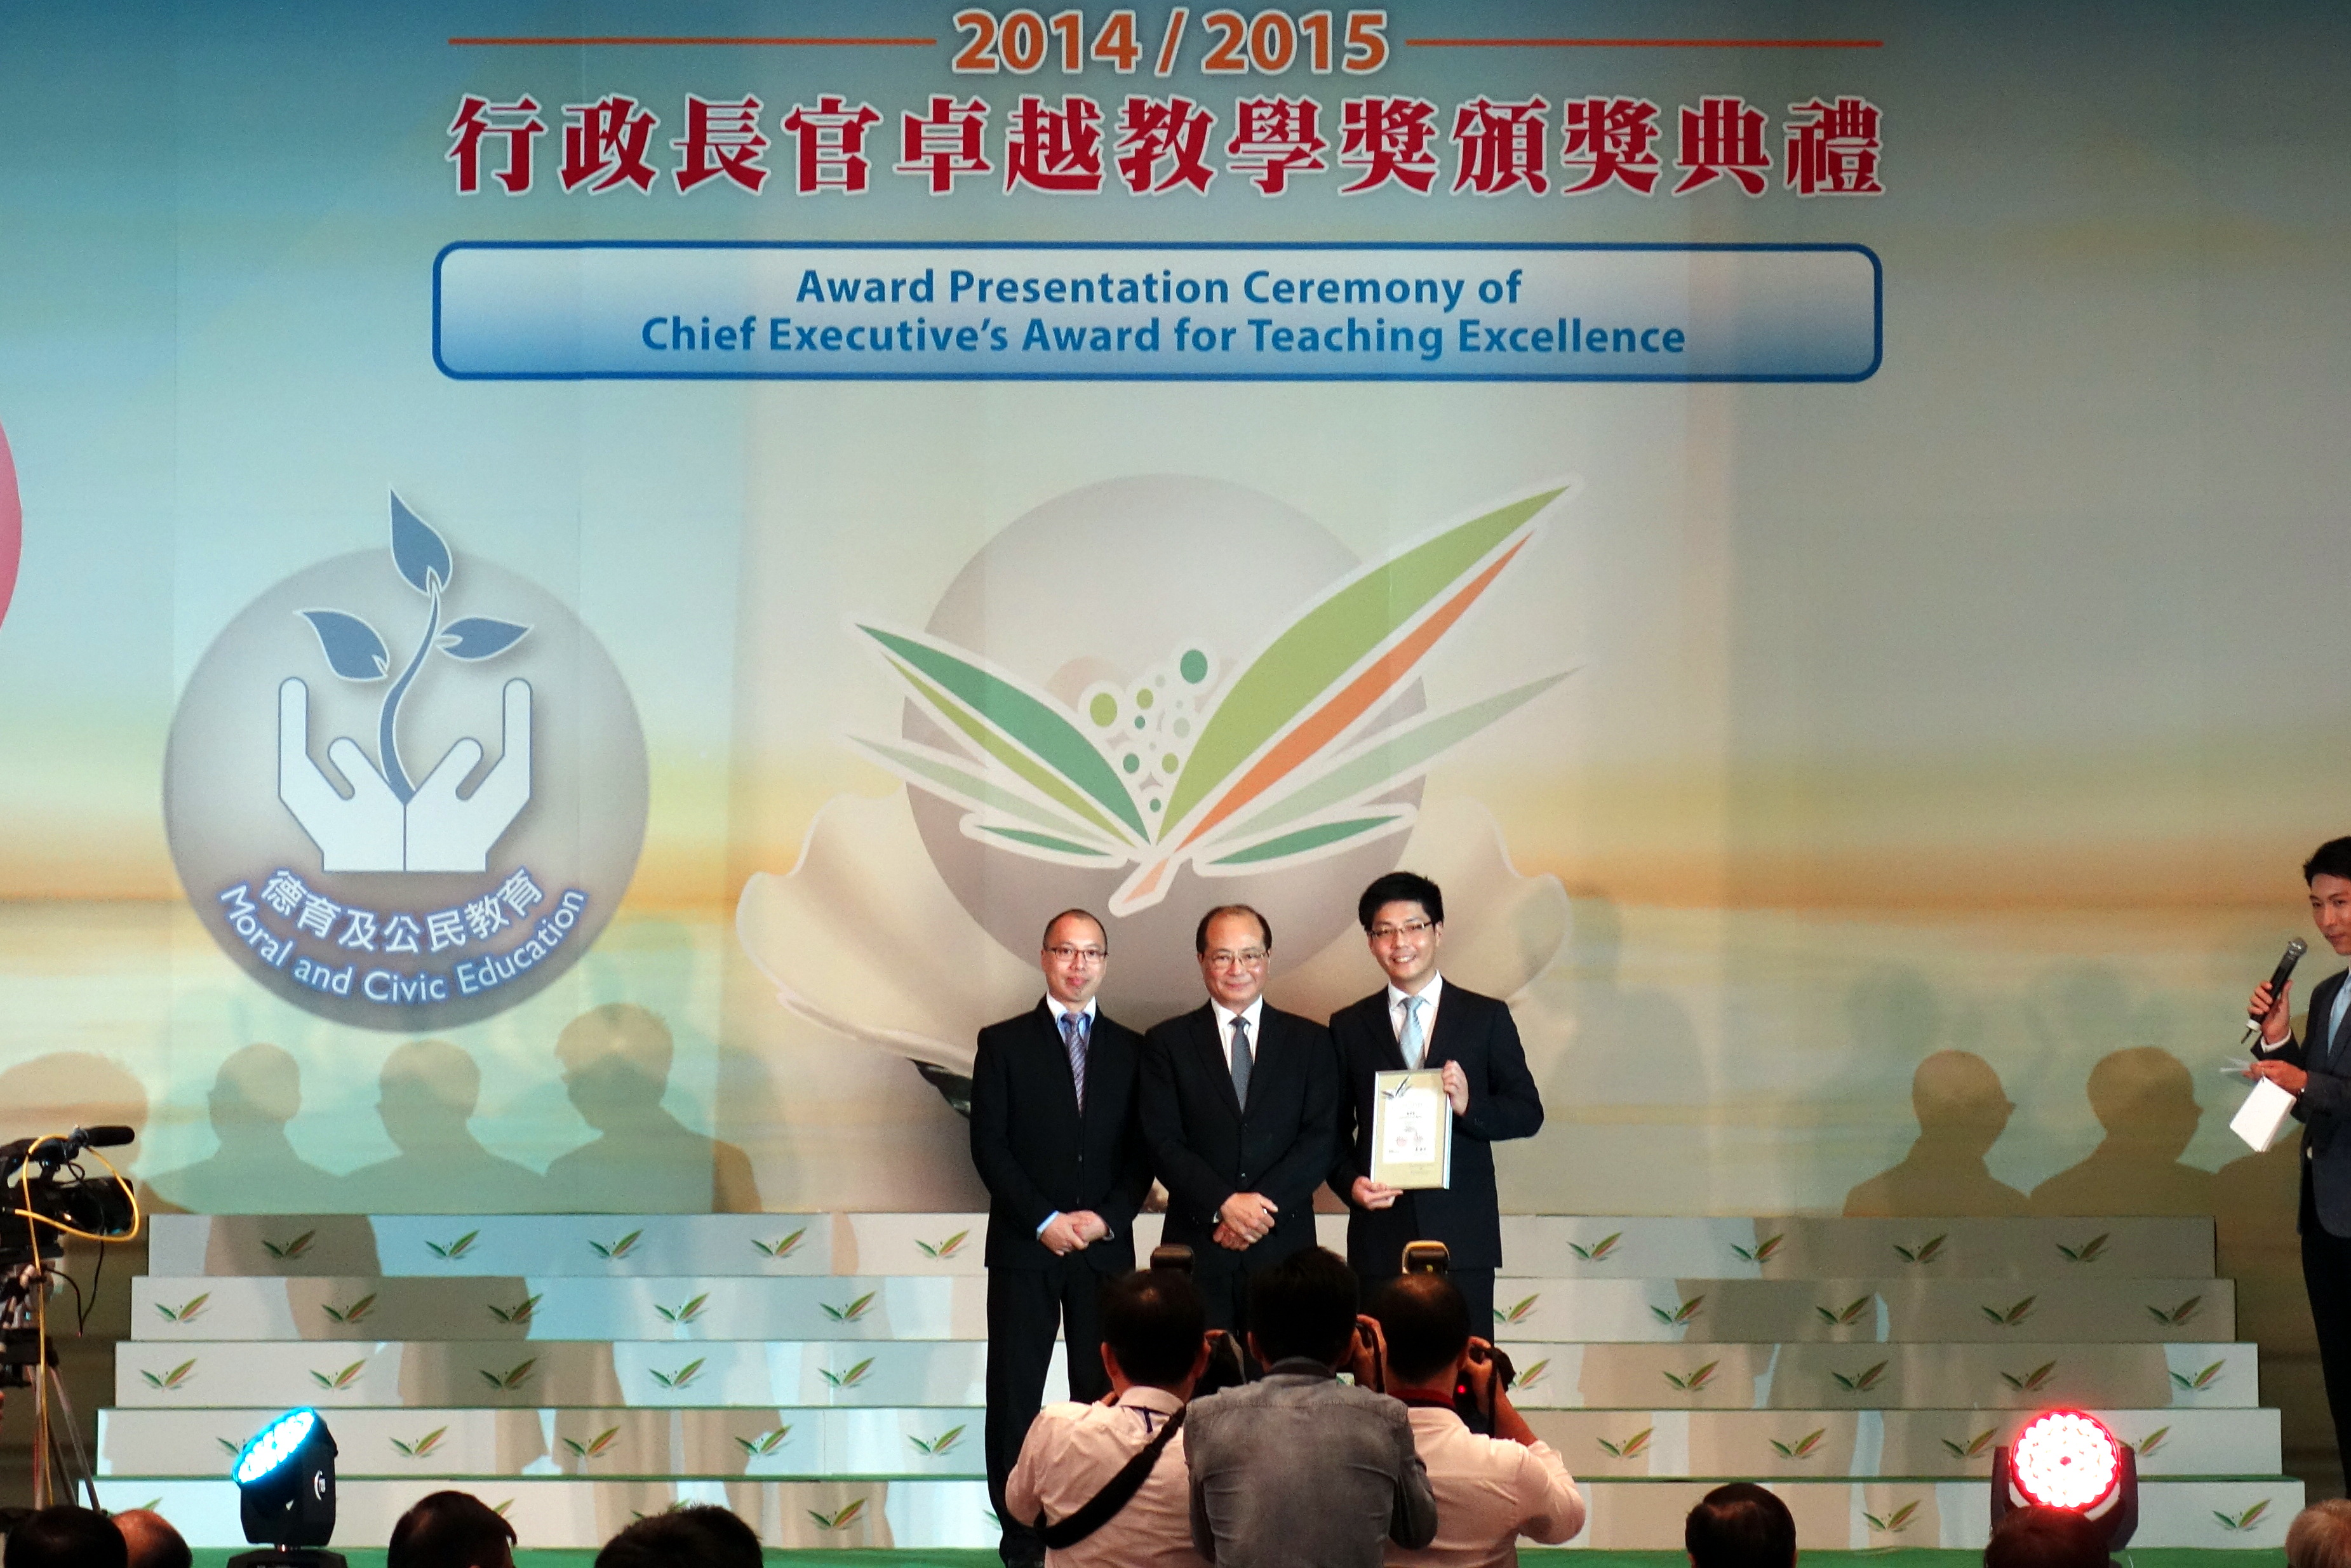 Chief Executive's Award for Teaching Excellence (CEATE)